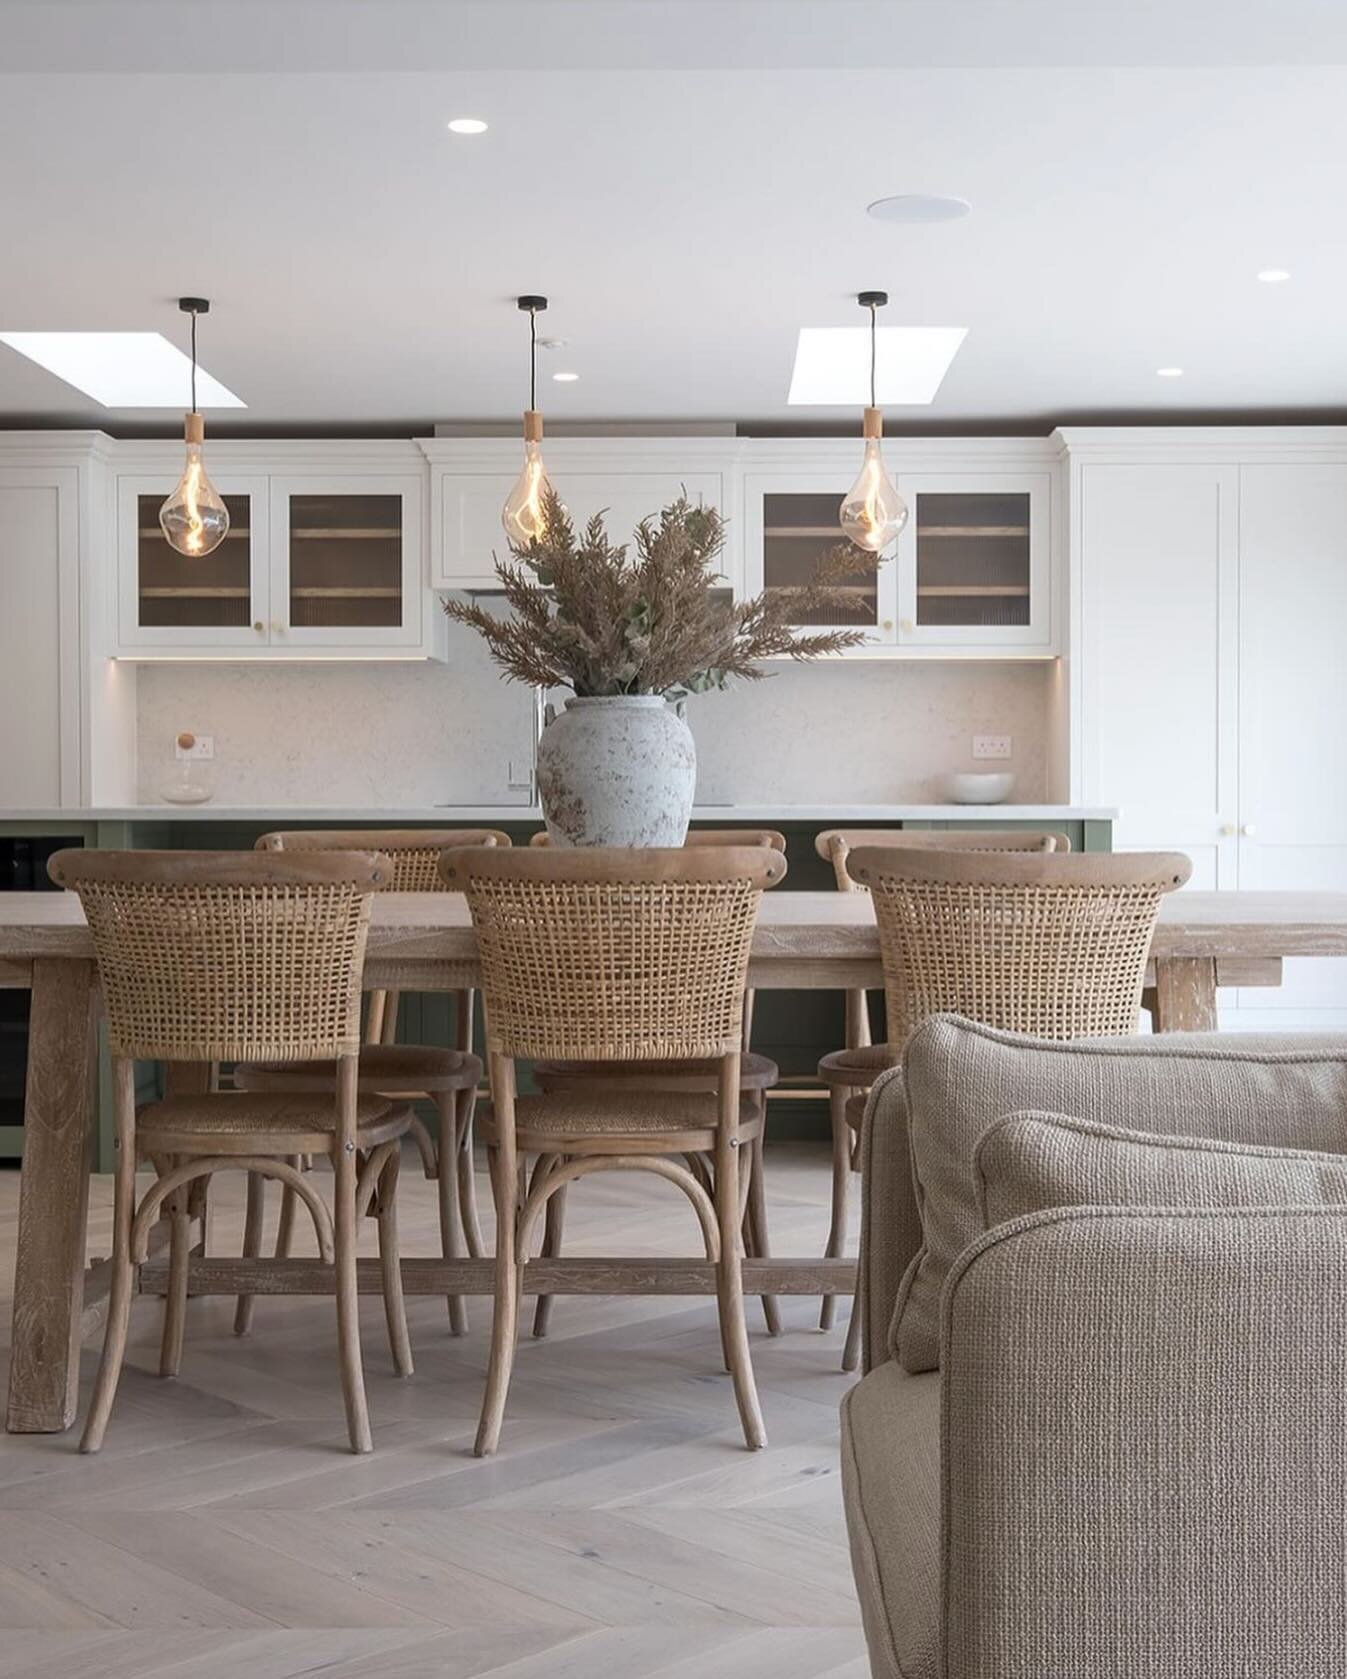 Warm lighting to match the neutral tones of the room in a Kitchen/Living area of dreams 💡✨

@coulondeisgn @meadowcroft_makeover and @artifex_build really delivered the clients needs and wants with this project and it was brilliant to work with them 